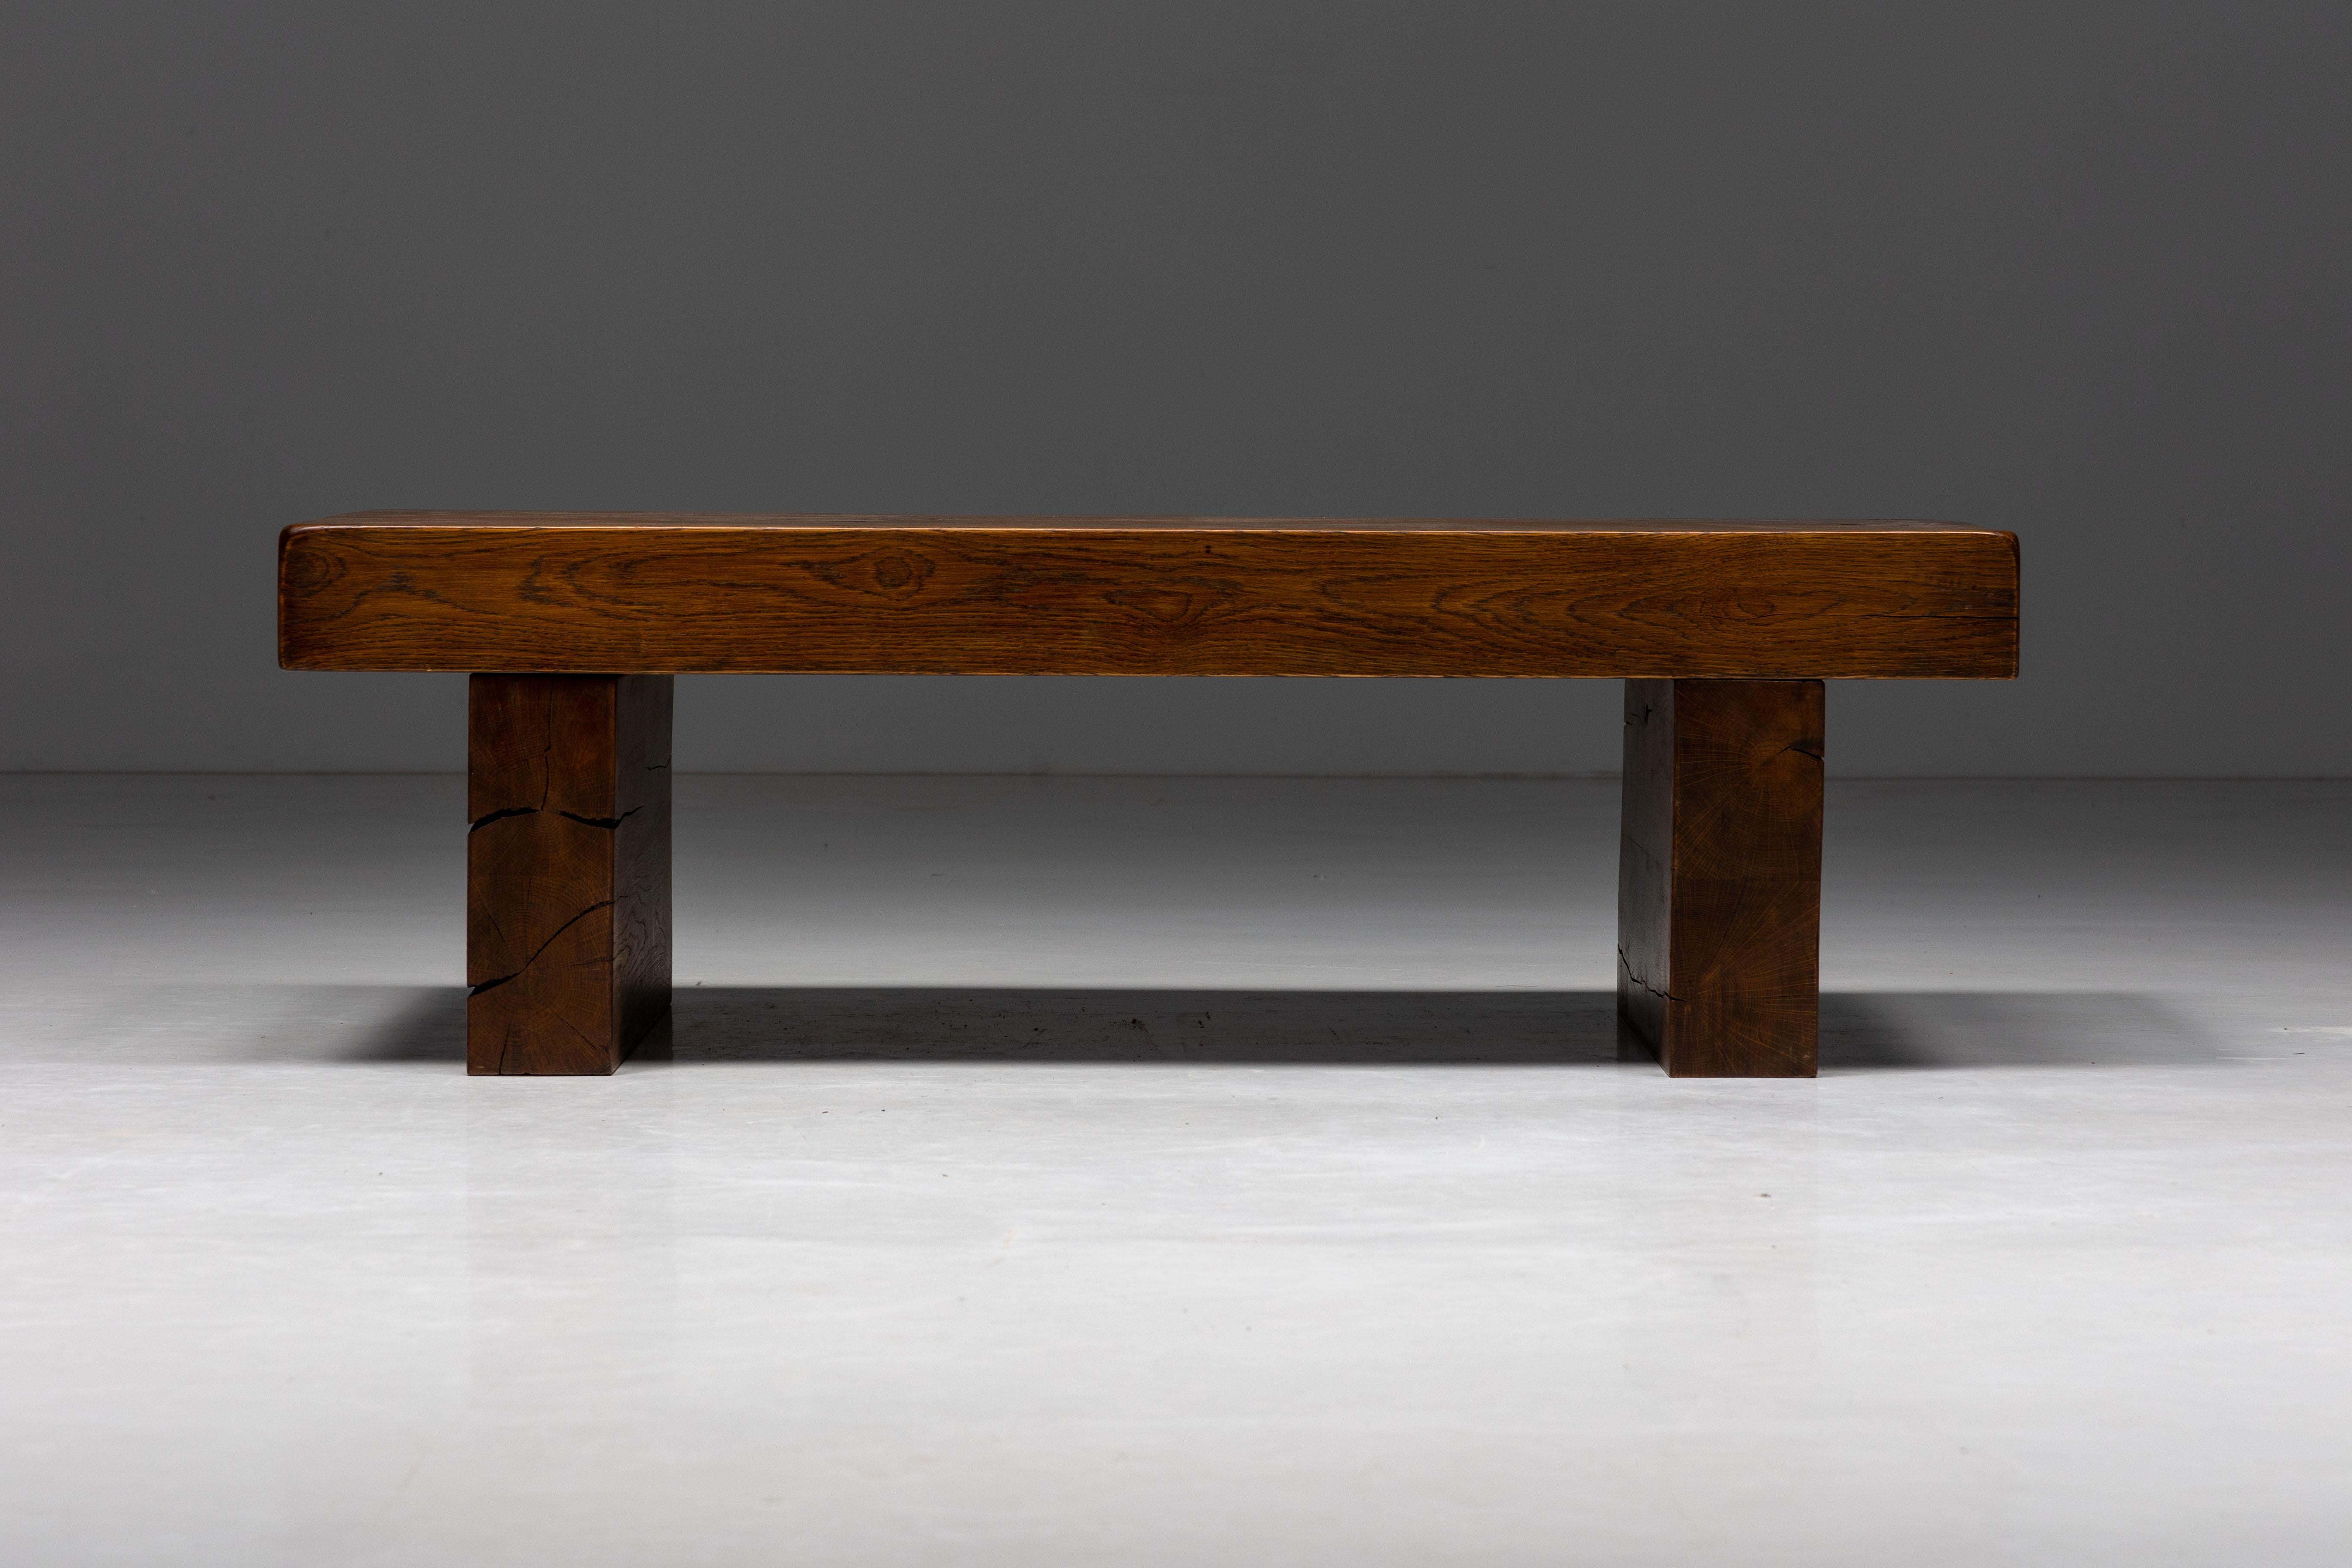 Primitive; Monoxylite; Rustic; Coffee Table; Wood; Wabi Sabi; Folk Art; Side Table; Patina; 1950s; Early 20th Century; France; Artisan;

Rustic brutalist wooden coffee table with a two-legged base, made of solid wood with a very charismatic